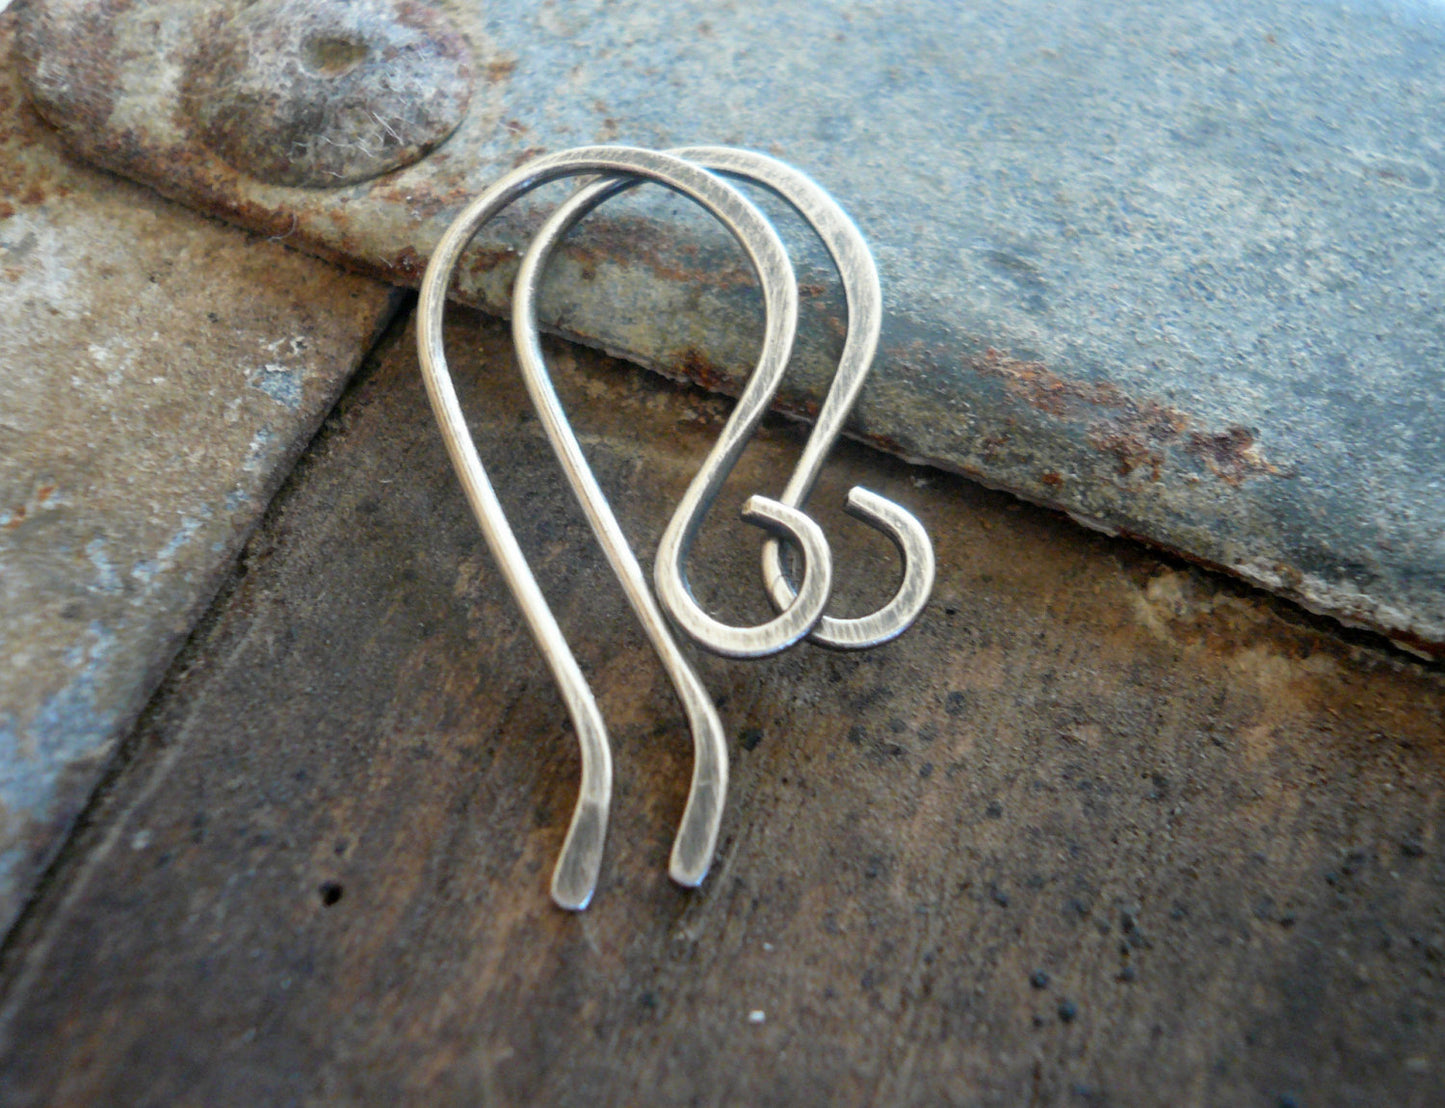 Dandy Sterling Silver Earwires - Handmade. Handforged. Oxidized and polished. Made to Order